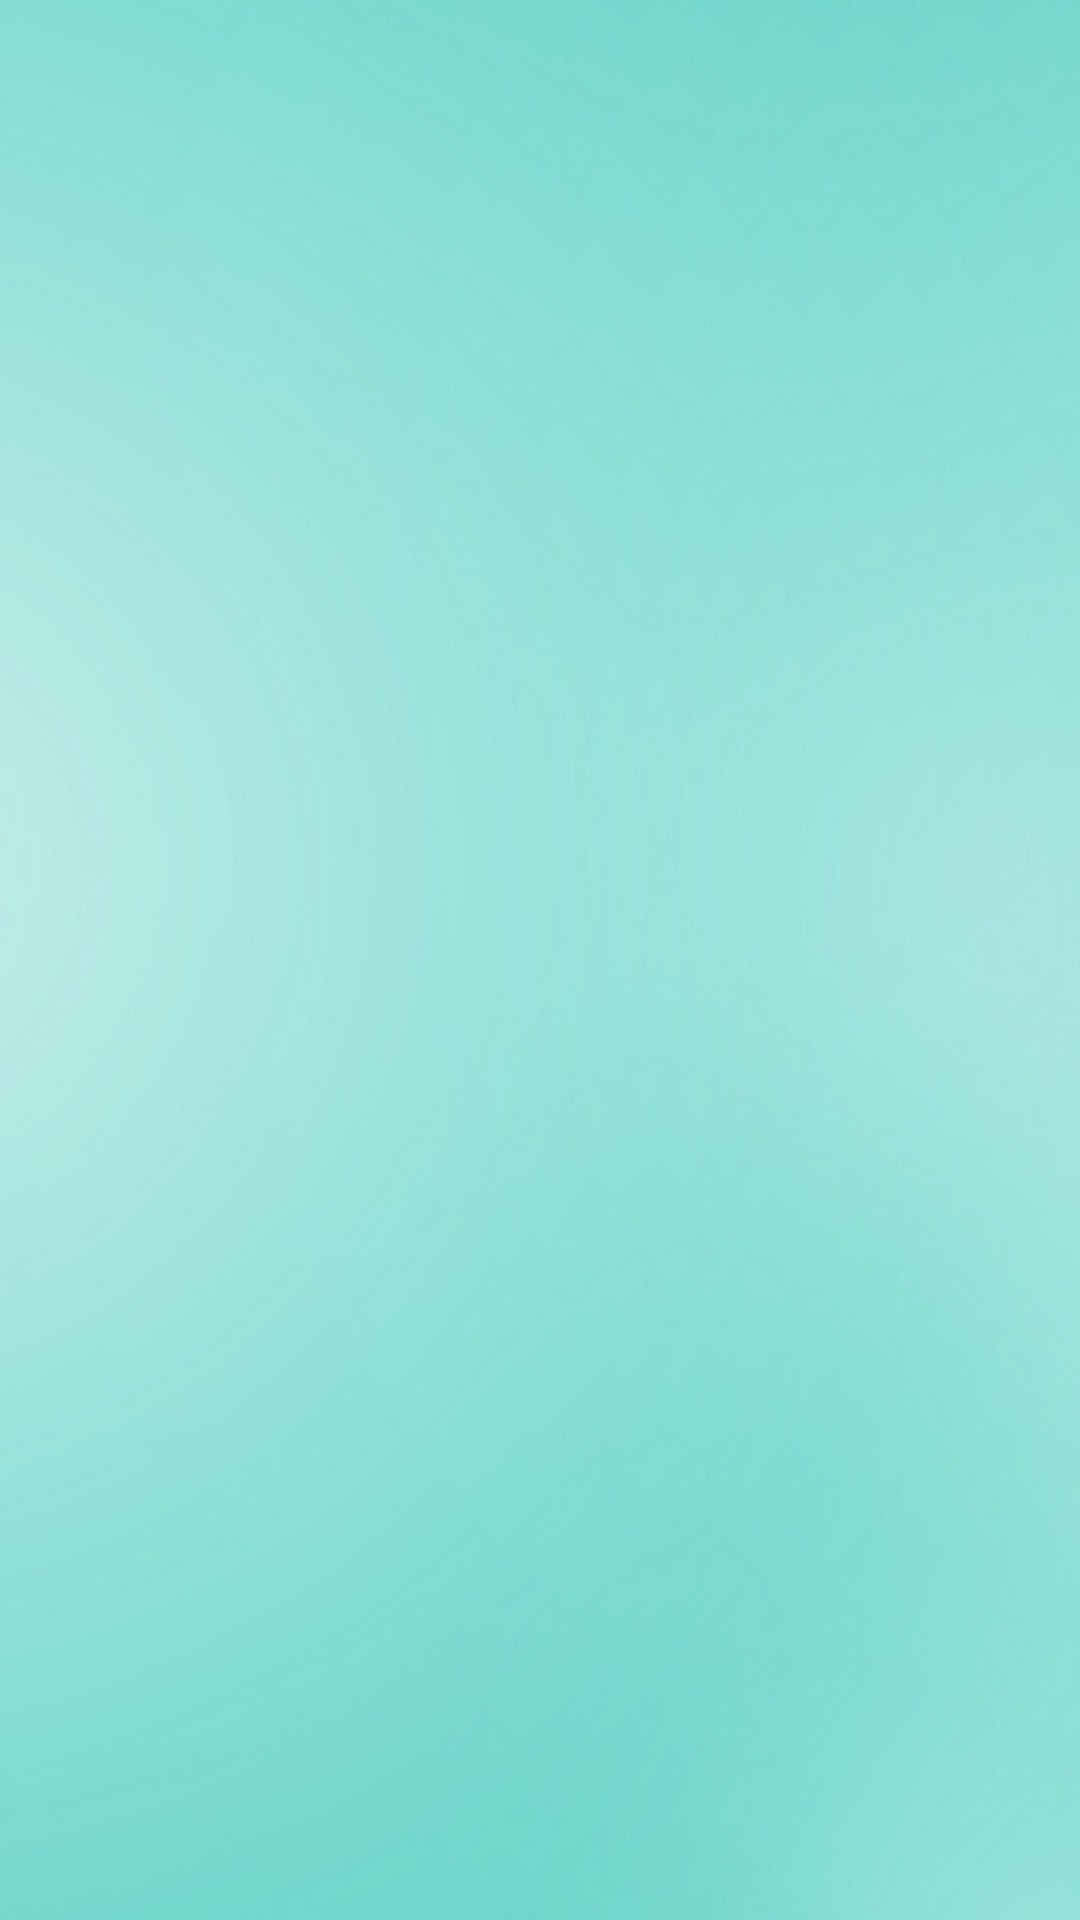 Mint Green Backgrounds For Android with image resolution 1080x1920 pixel. You can make this wallpaper for your Android backgrounds, Tablet, Smartphones Screensavers and Mobile Phone Lock Screen